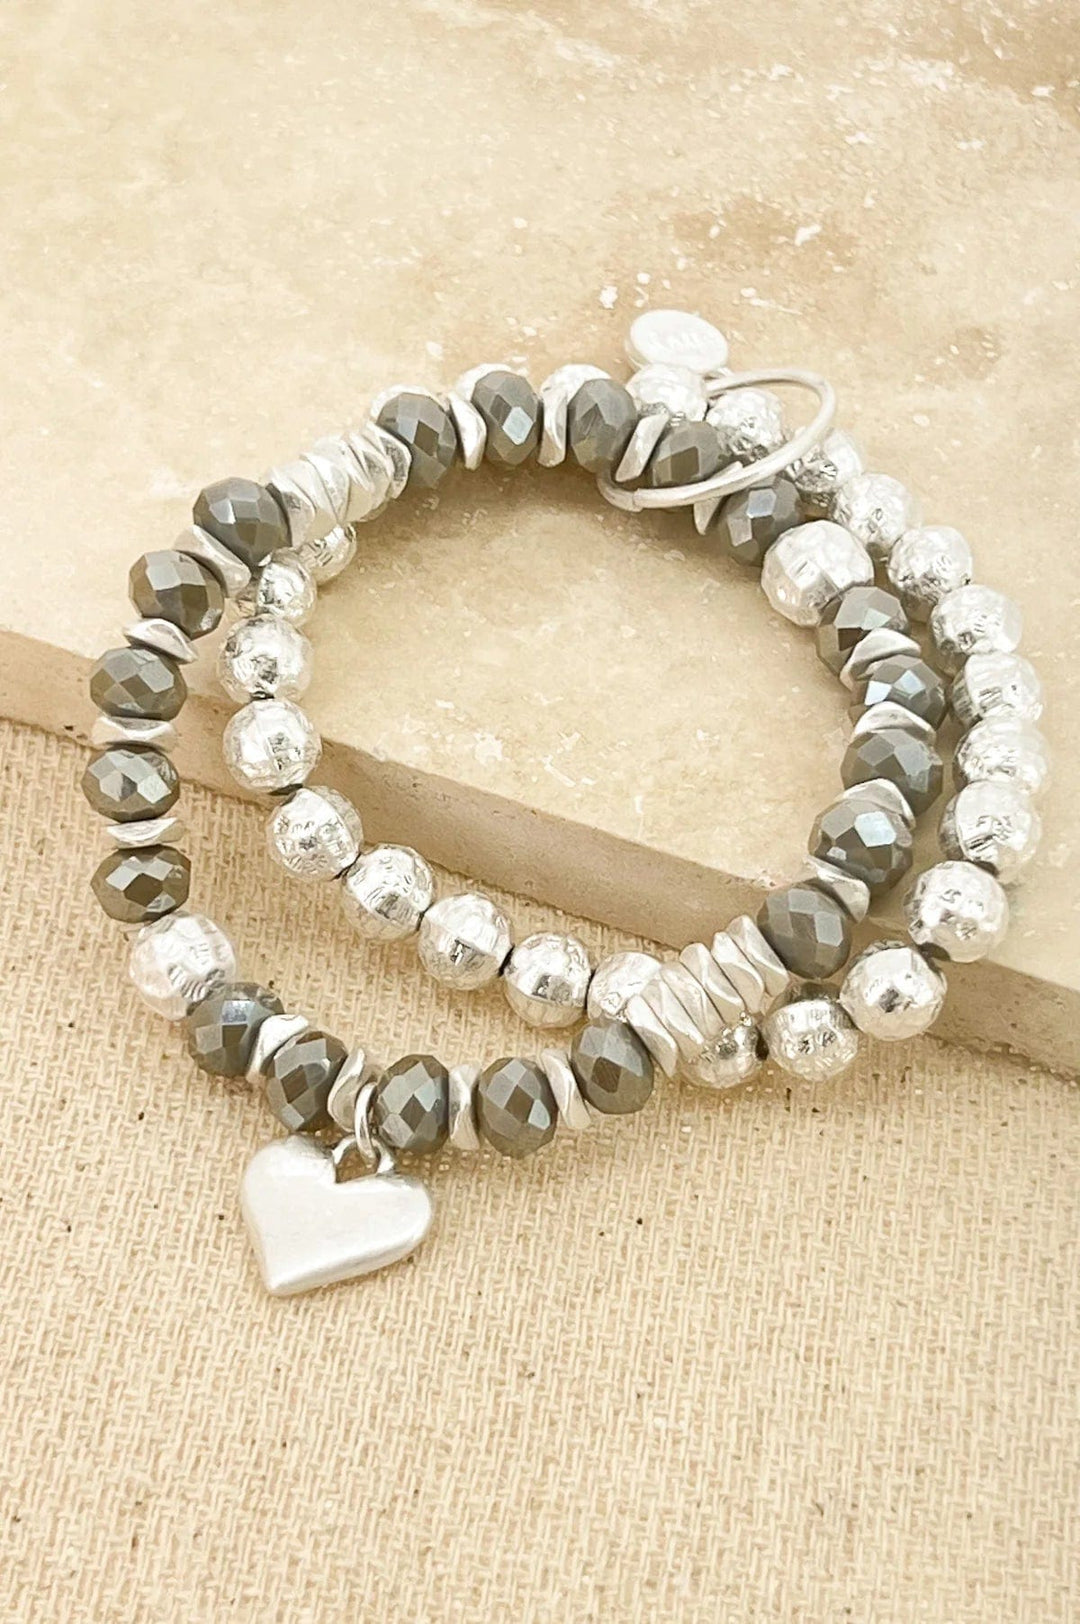 Envy Faceted Bead Multi Layer Bracelet In Silver & Grey - Crabtree Cottage